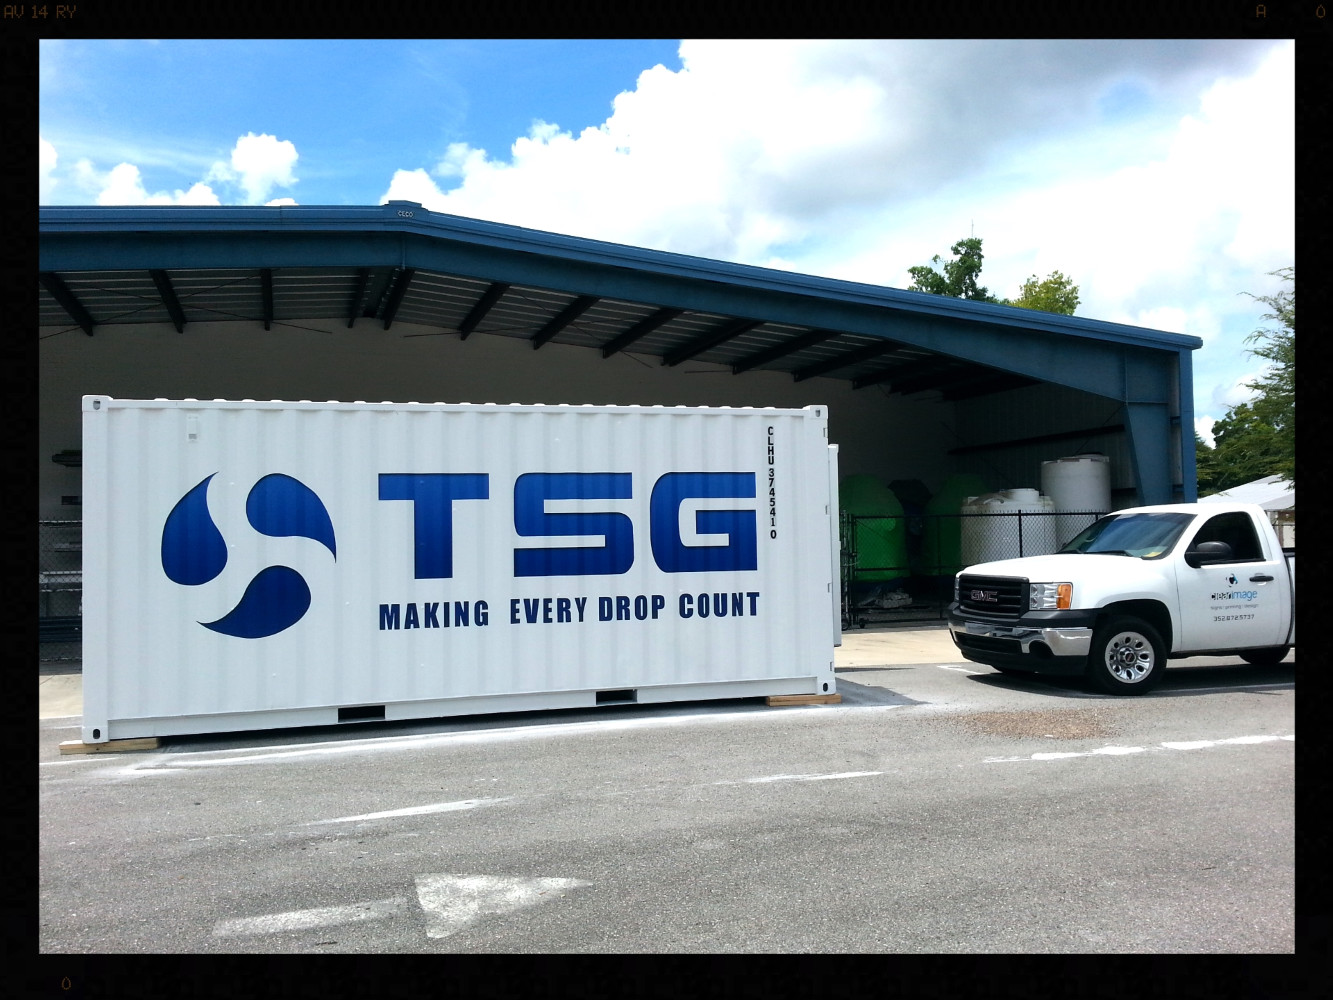 Digital print graphics on shipping container
Gainesville, Florida